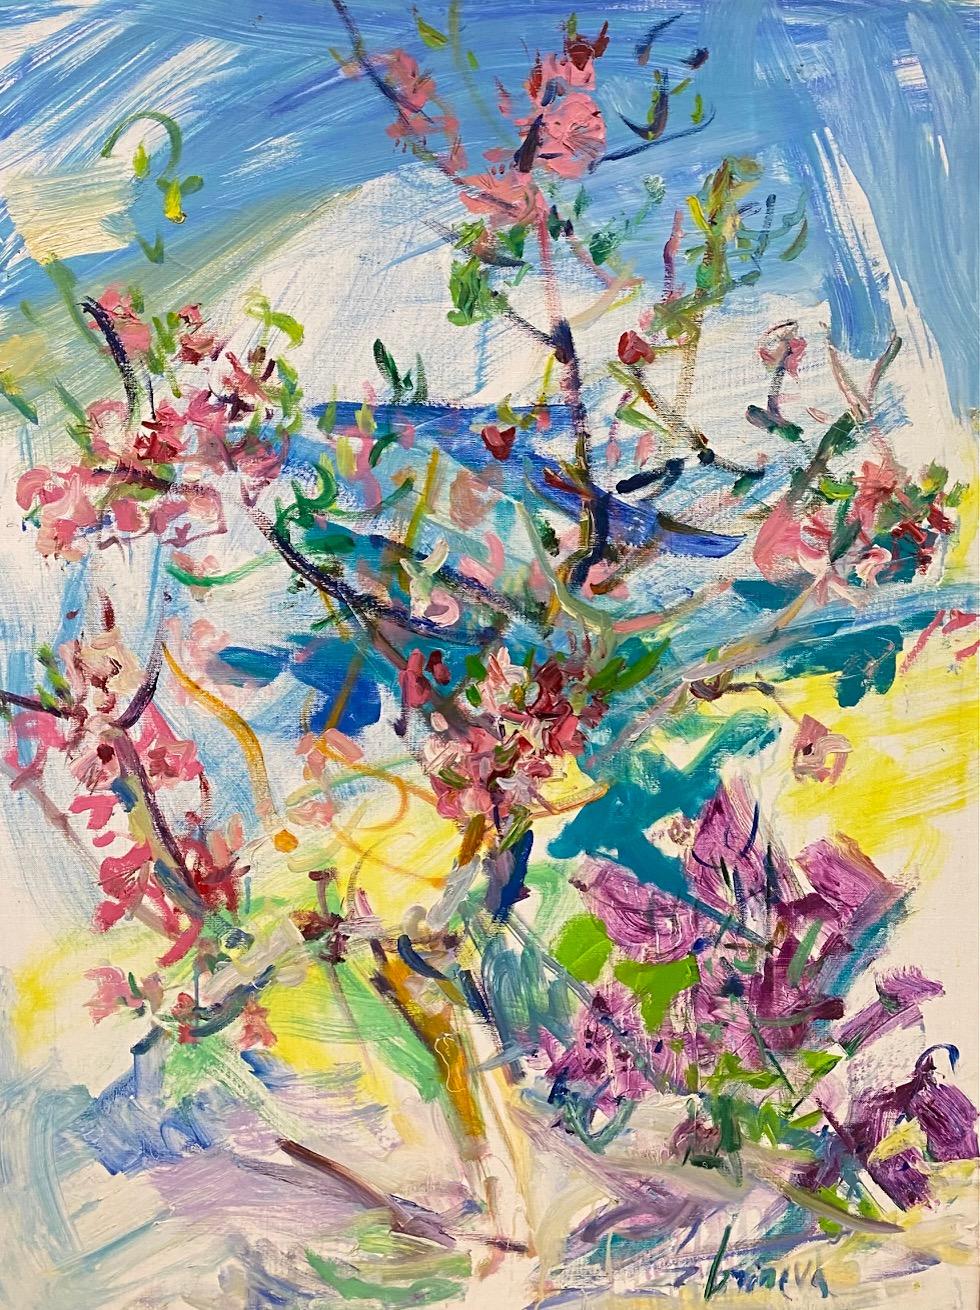 Island Winds of Italy, paysage floral expressionniste abstrait, 48x36 - Painting de Sonia Grineva